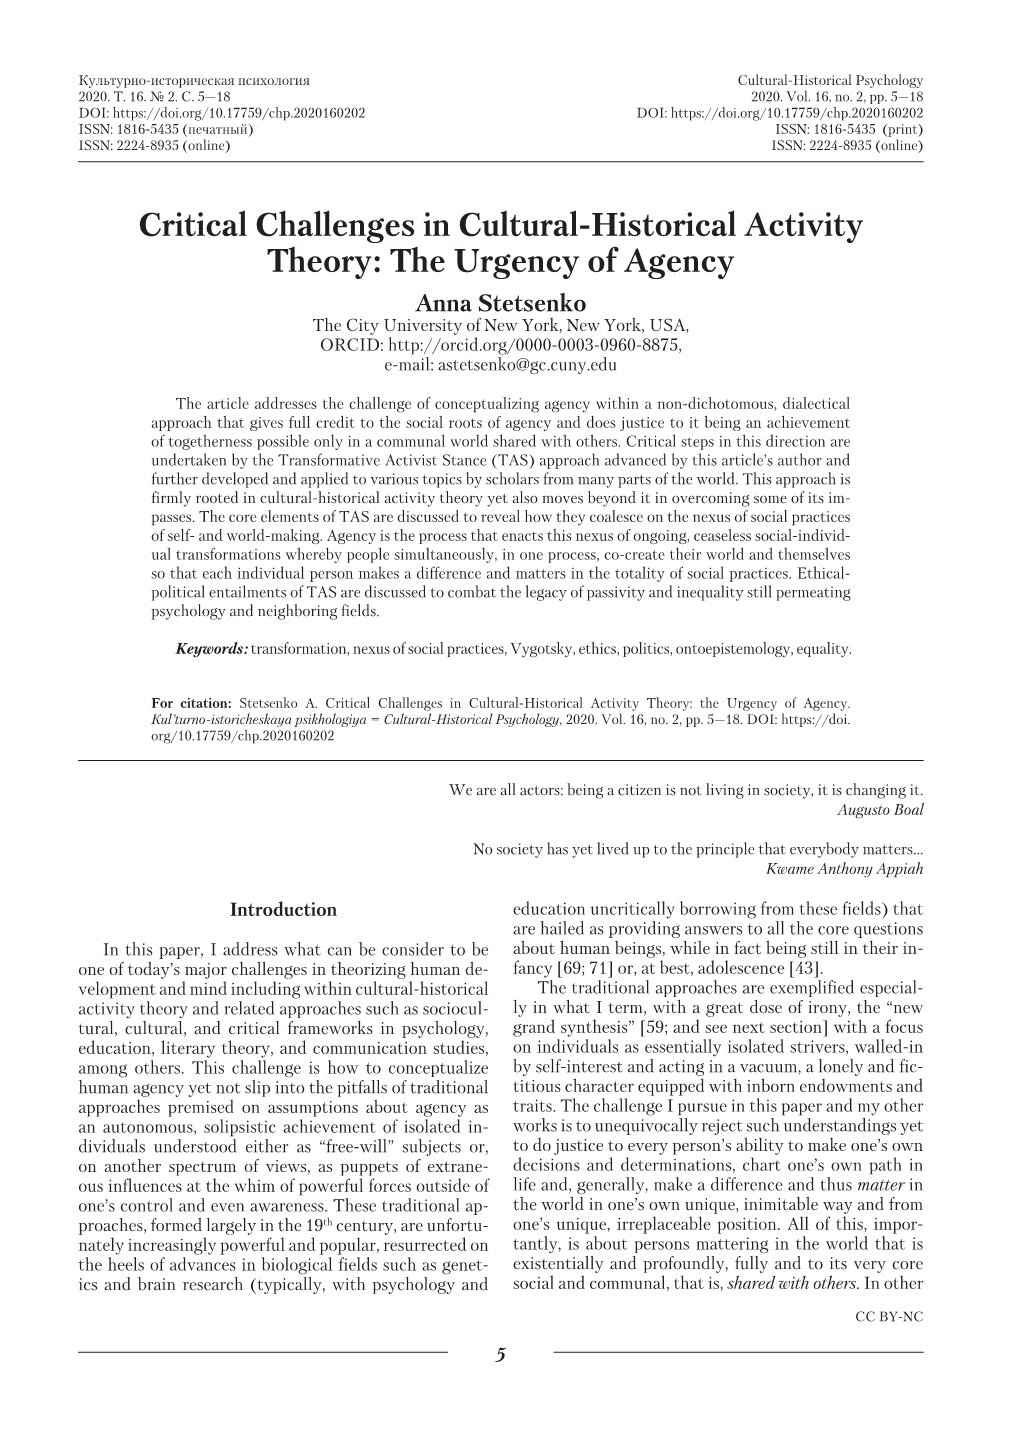 Critical Challenges in Cultural-Historical Activity Theory